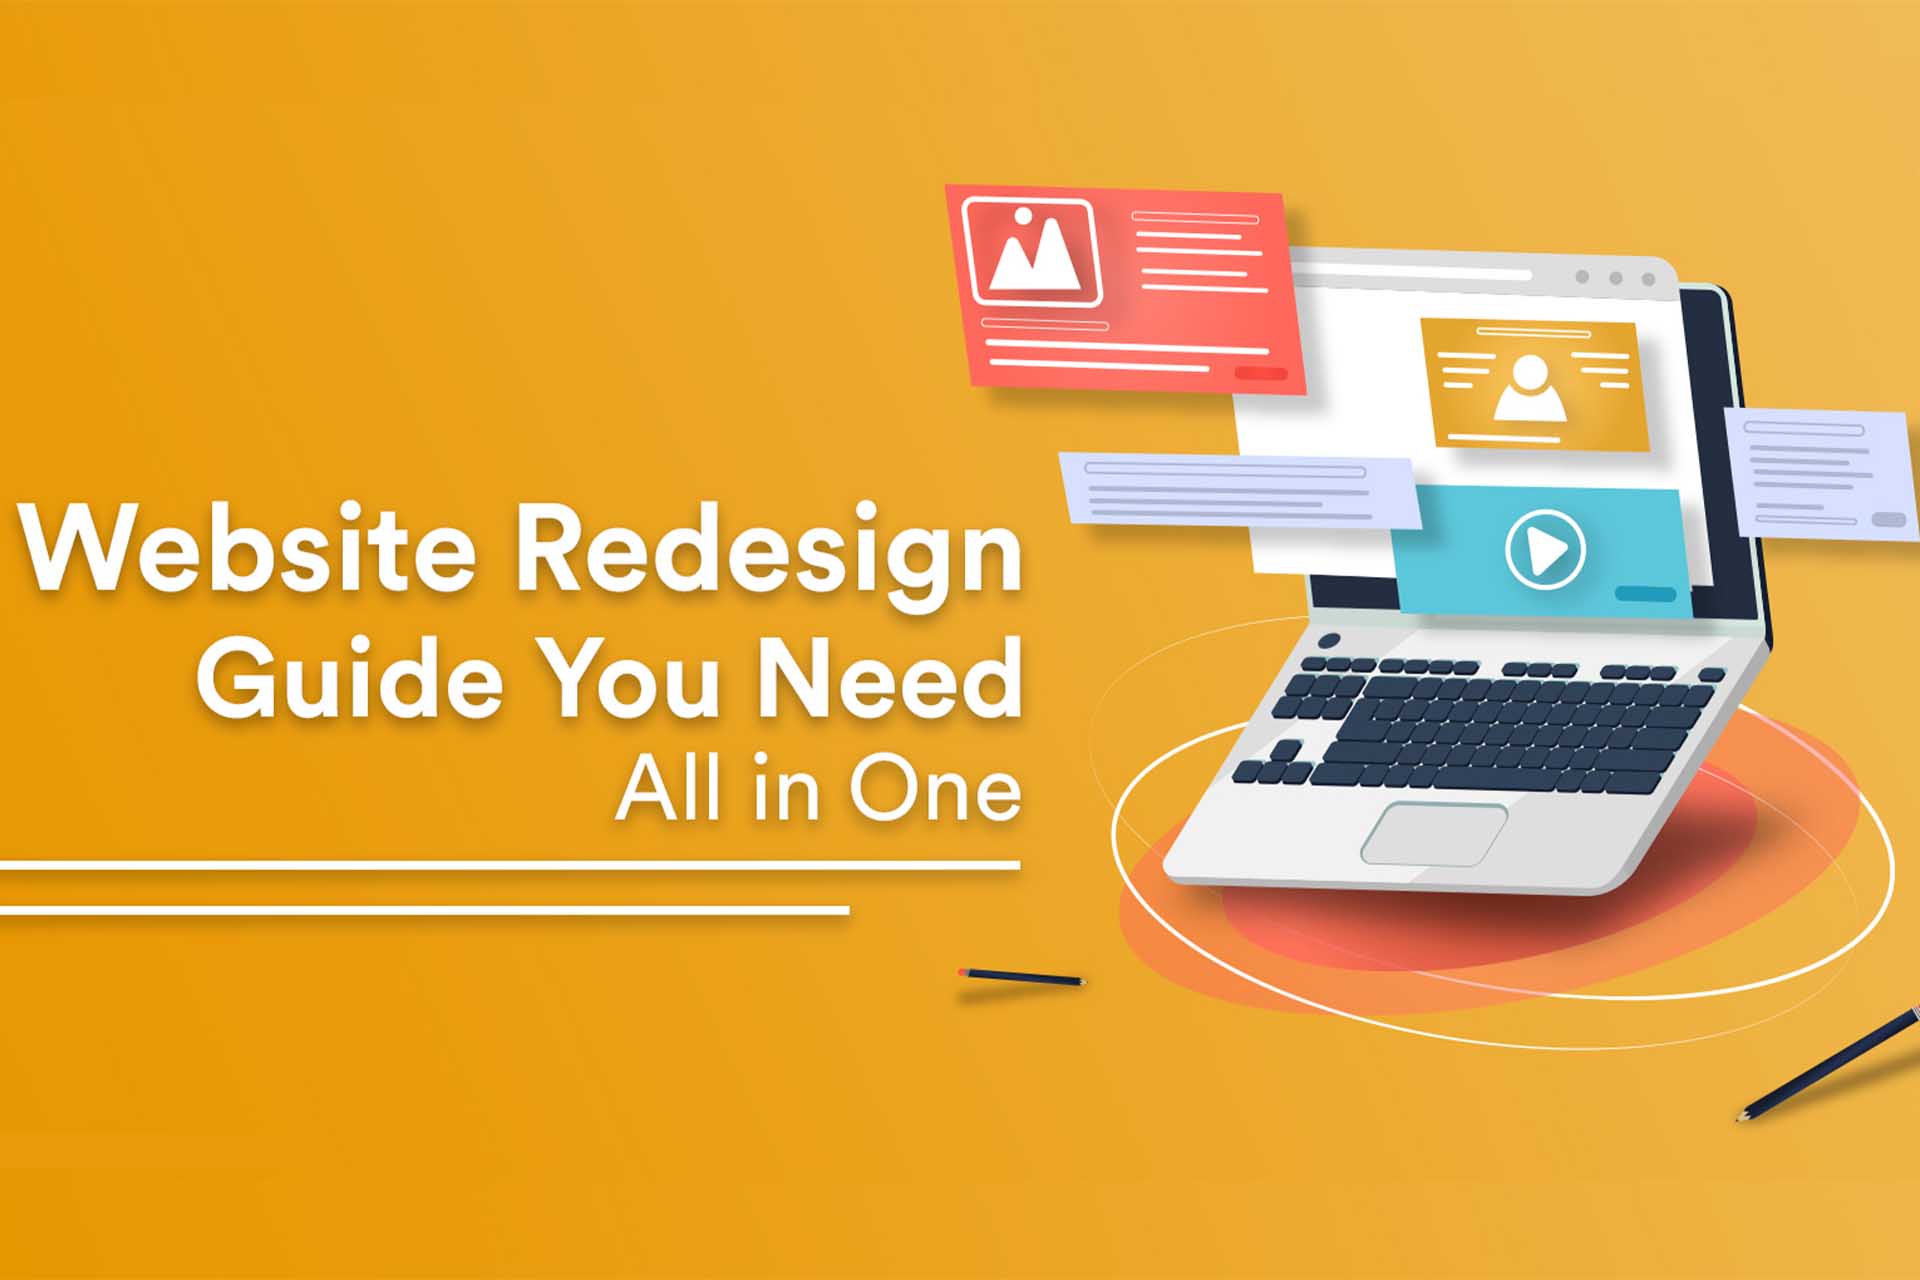 What you should expect From a Website Redesign